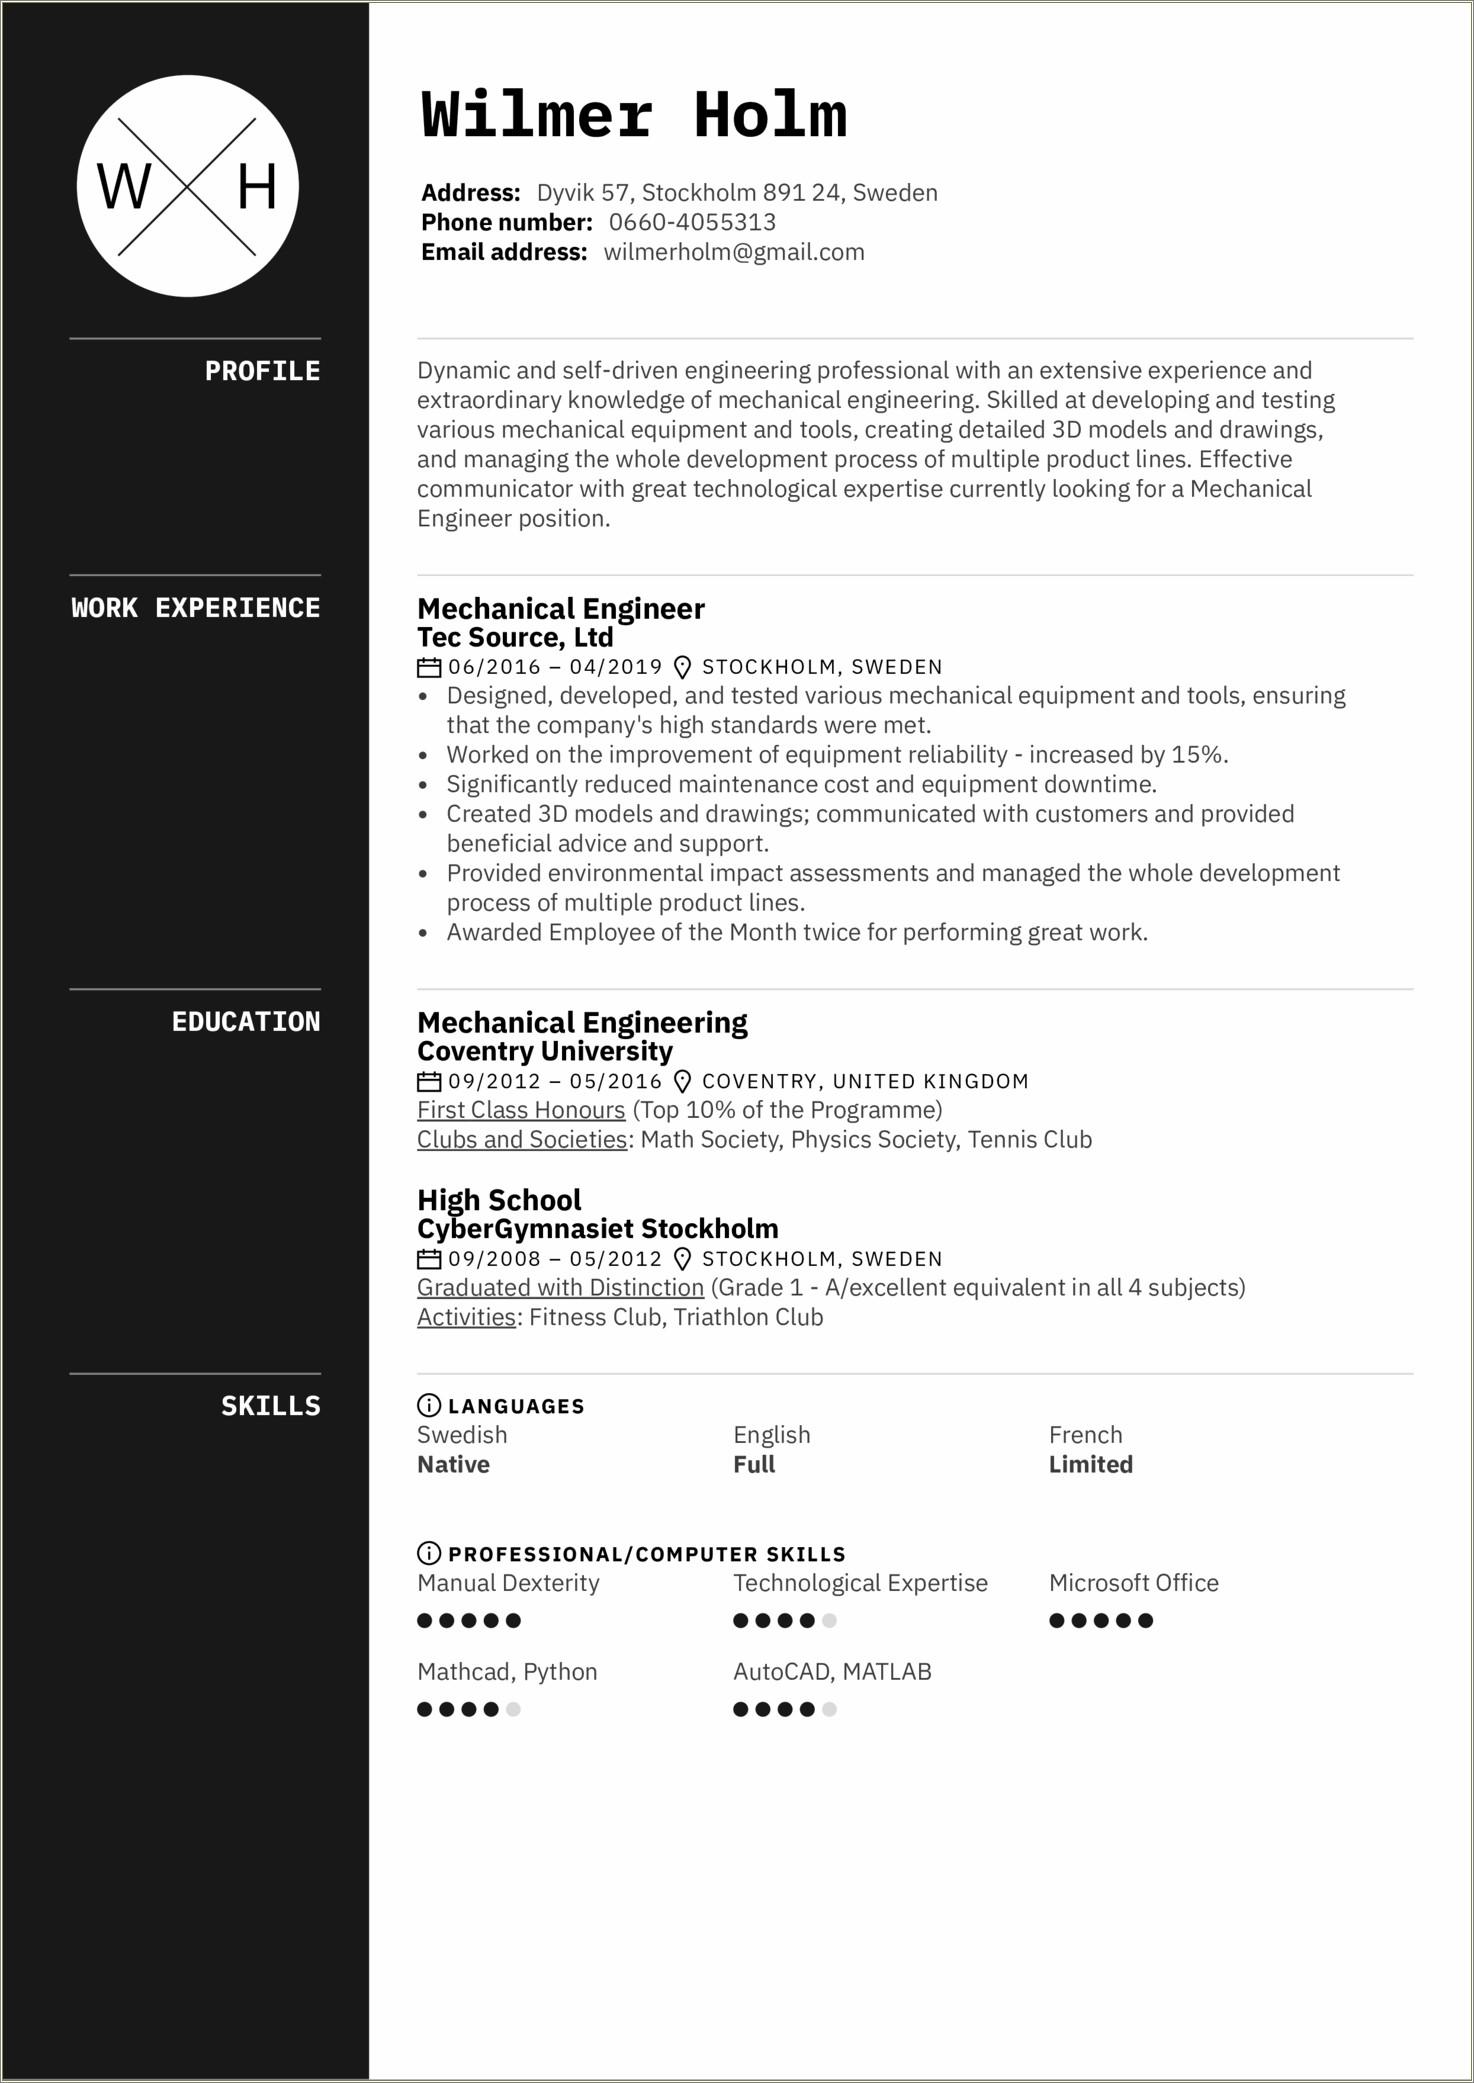 Mobile Testing 1 Year Experience Resume